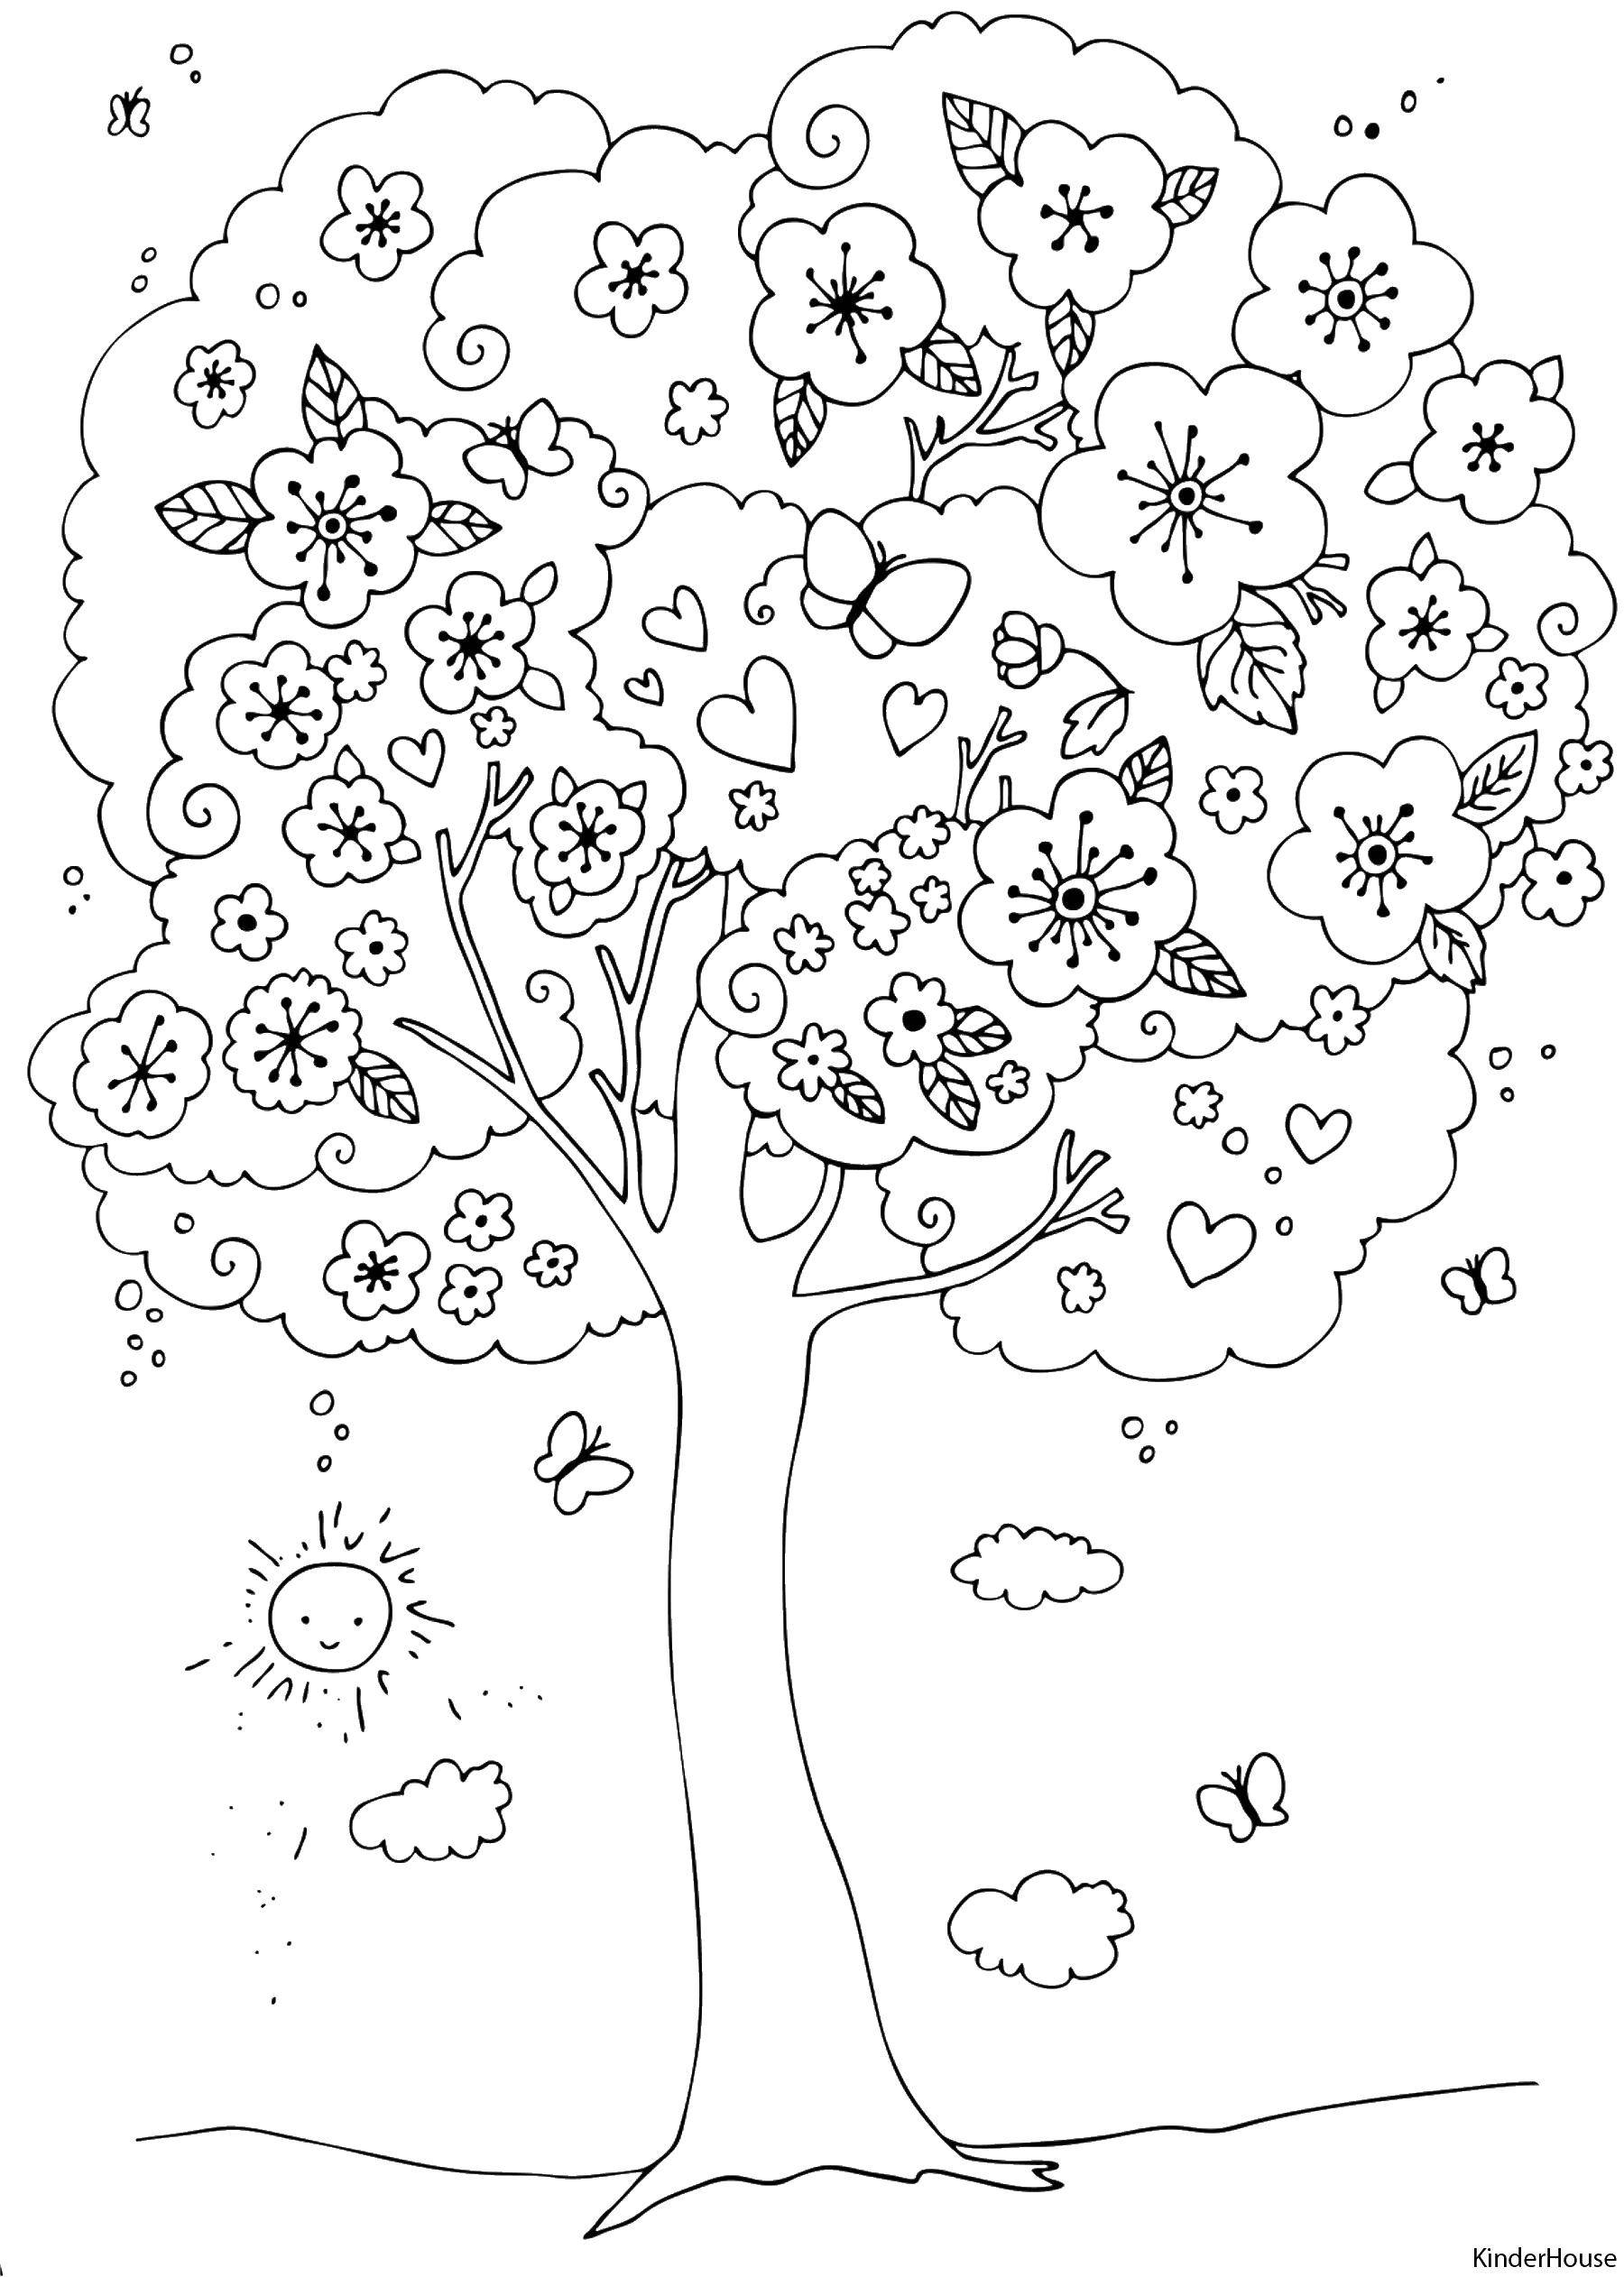 Coloring Spring tree. Category spring. Tags:  Spring, flowers, warmth.